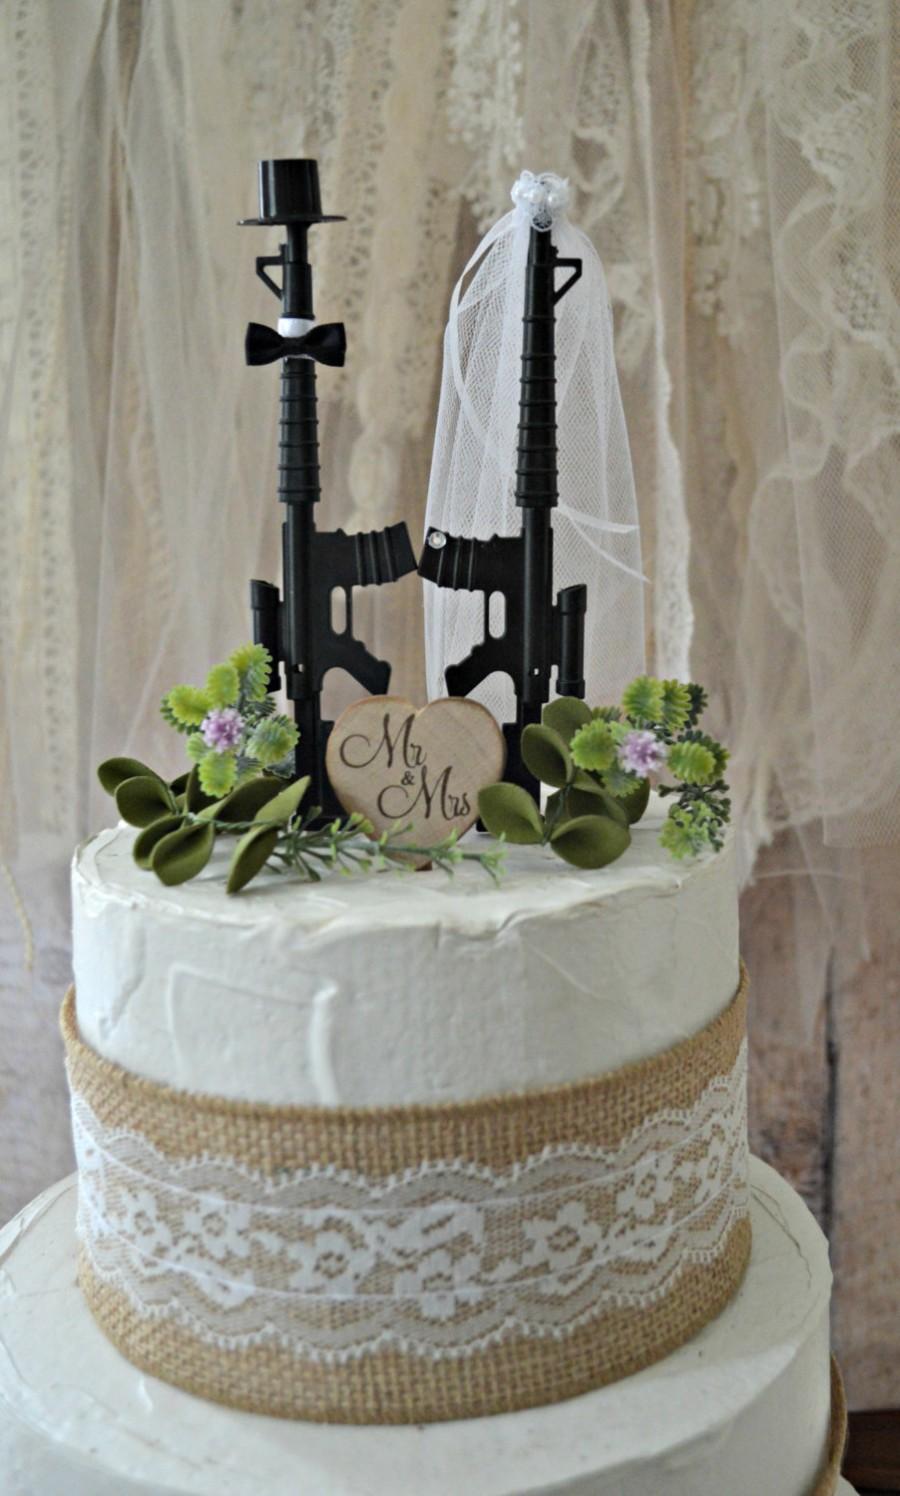 Hochzeit - Machine gun weapon wedding cake topper army police themed hunting groom's cake Mr & Mrs sing the hunt is over gun decorations military sign